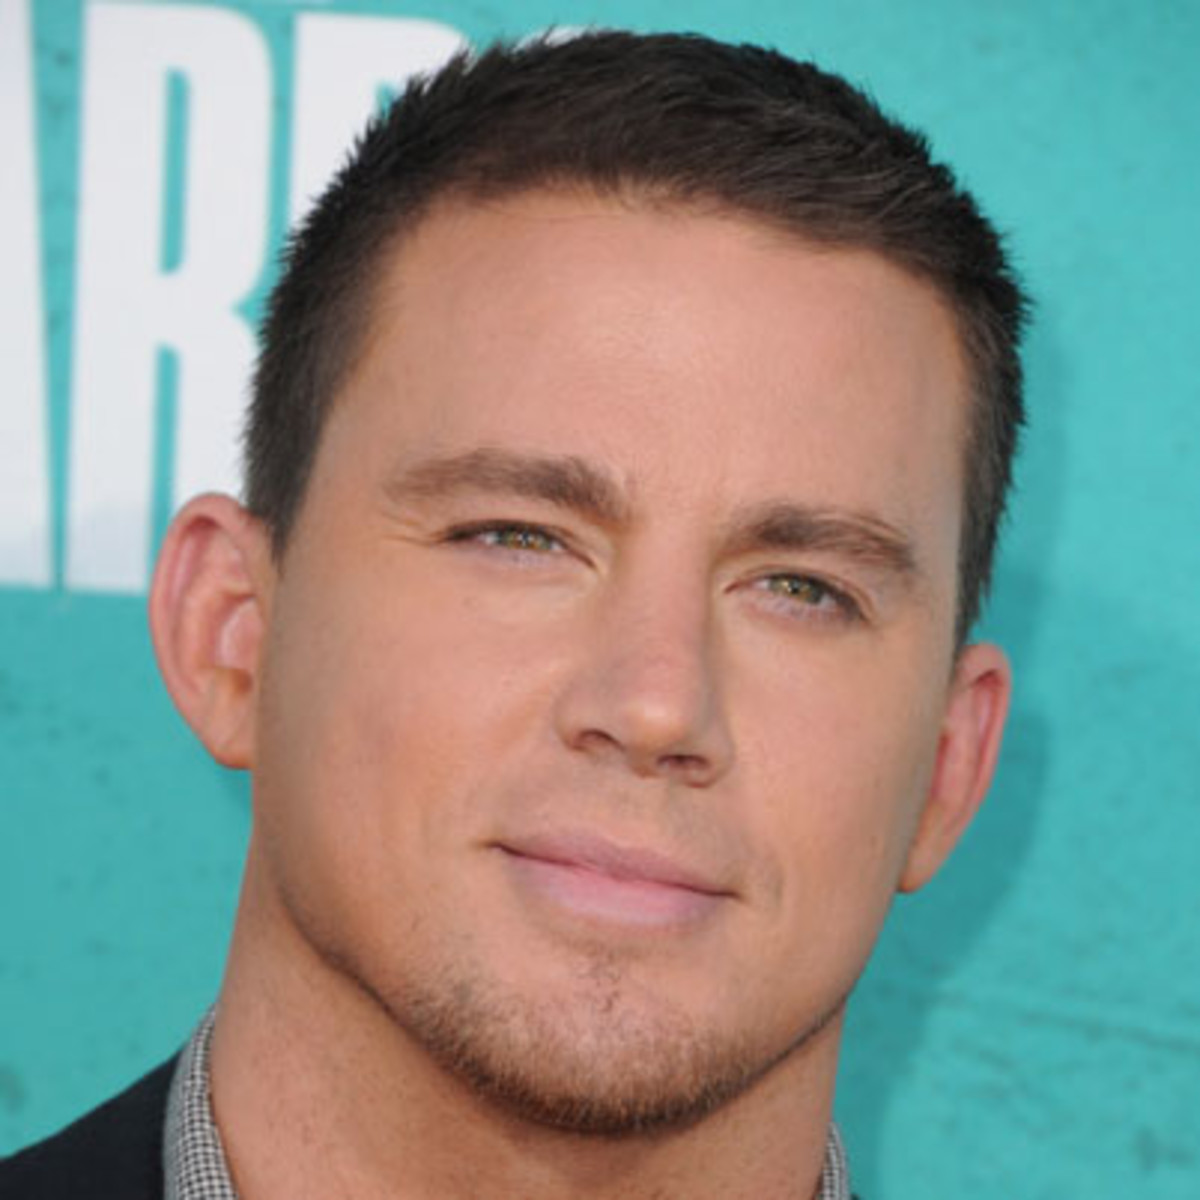 Channing Tatum says he doesn’t know if he’ll ever remarry